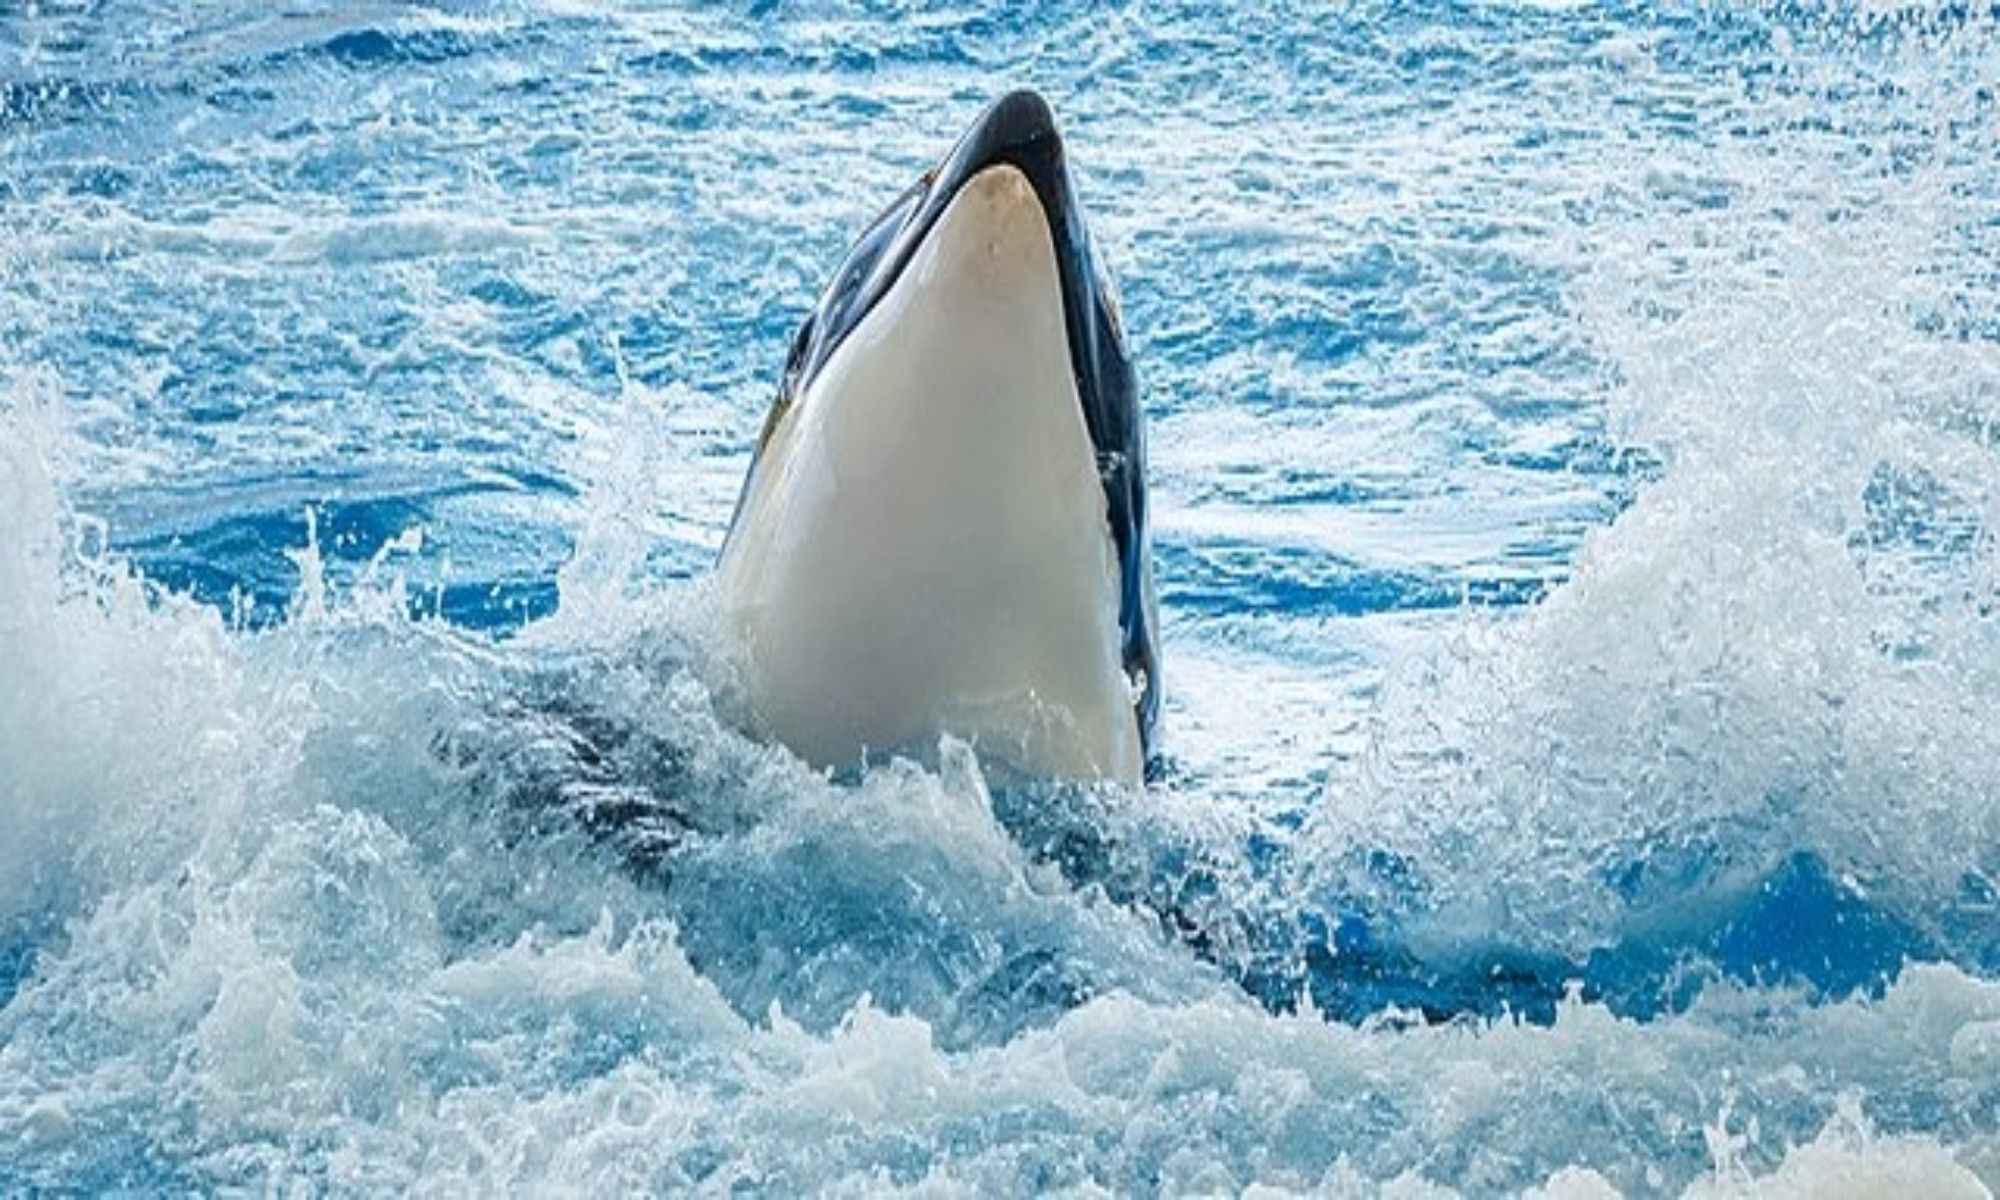 Orcas: Why Are They Called Killer Whales?